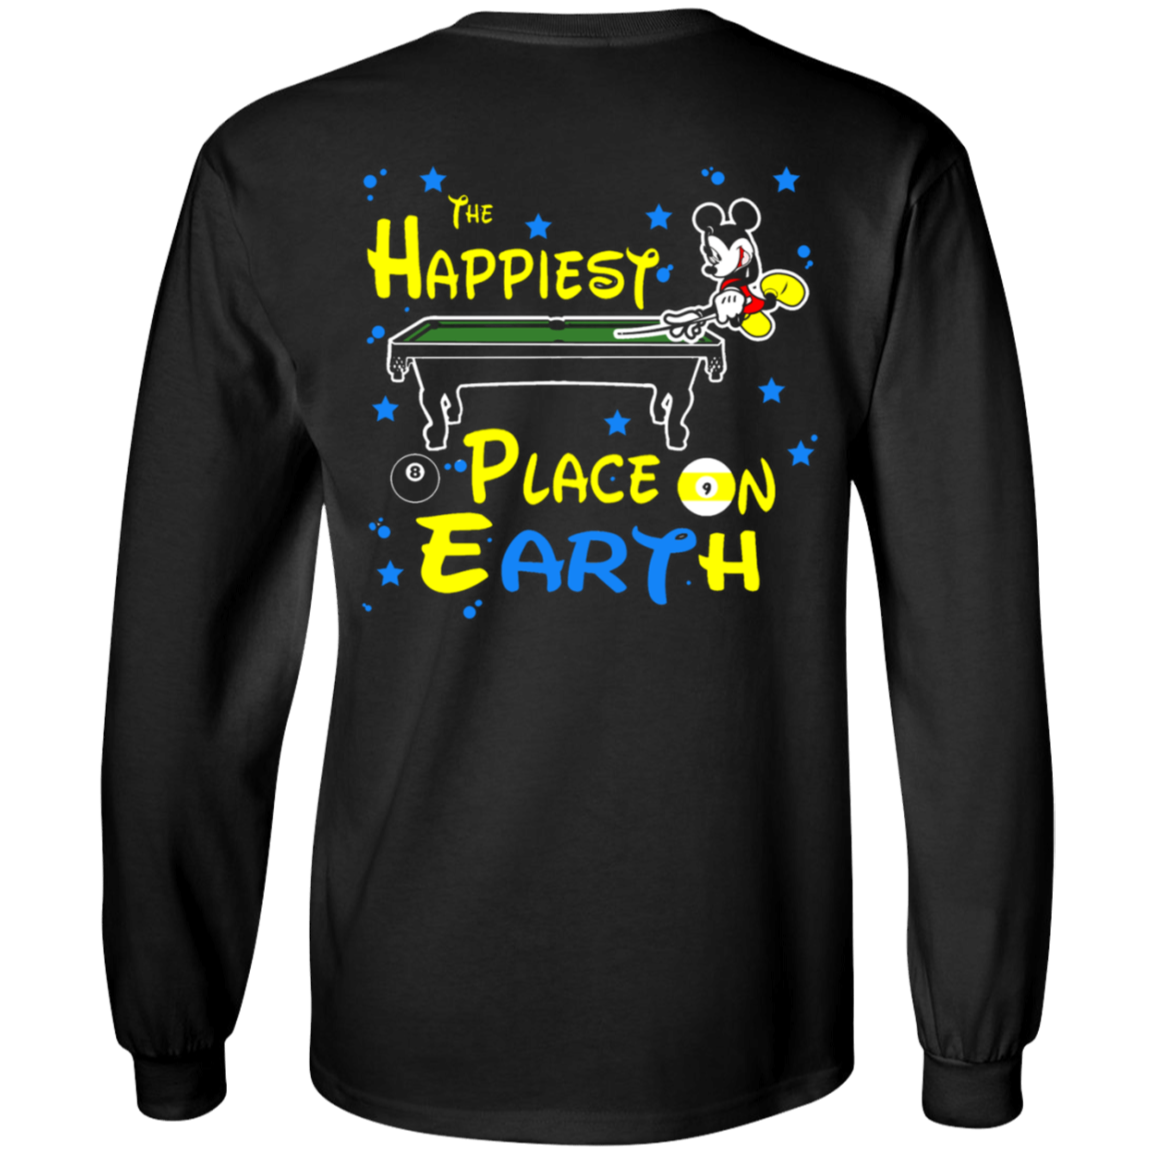 The GHOATS custom design #14. The Happiest Place On Earth. Fan Art. Long Sleeve Cotton T-Shirt